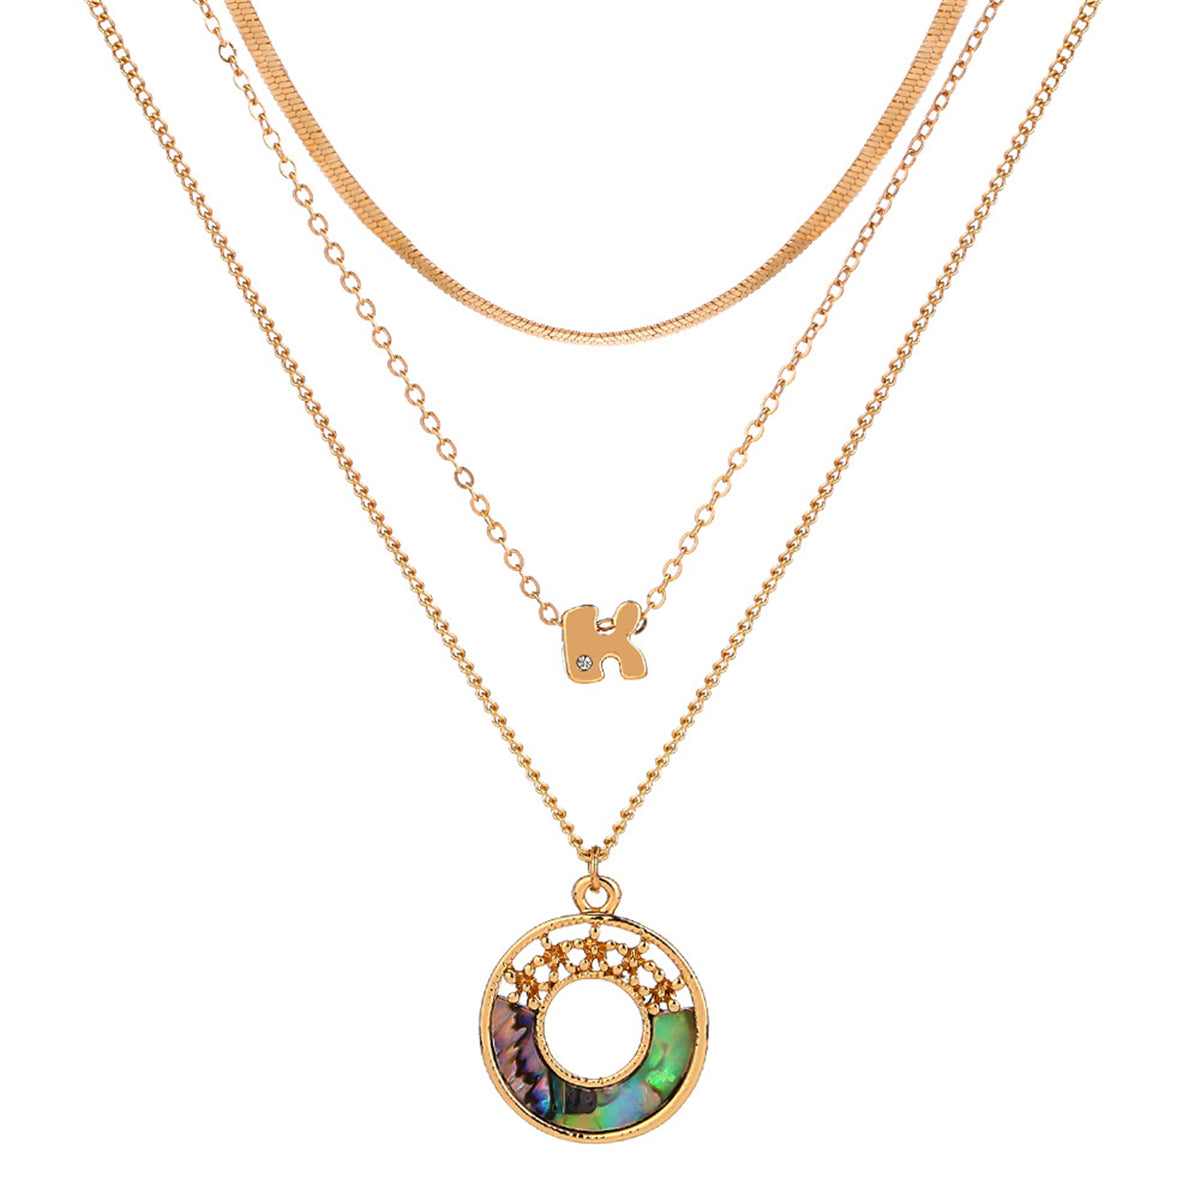 Abalone & 18K Gold-Plated 'K' Layered Pendant Necklace